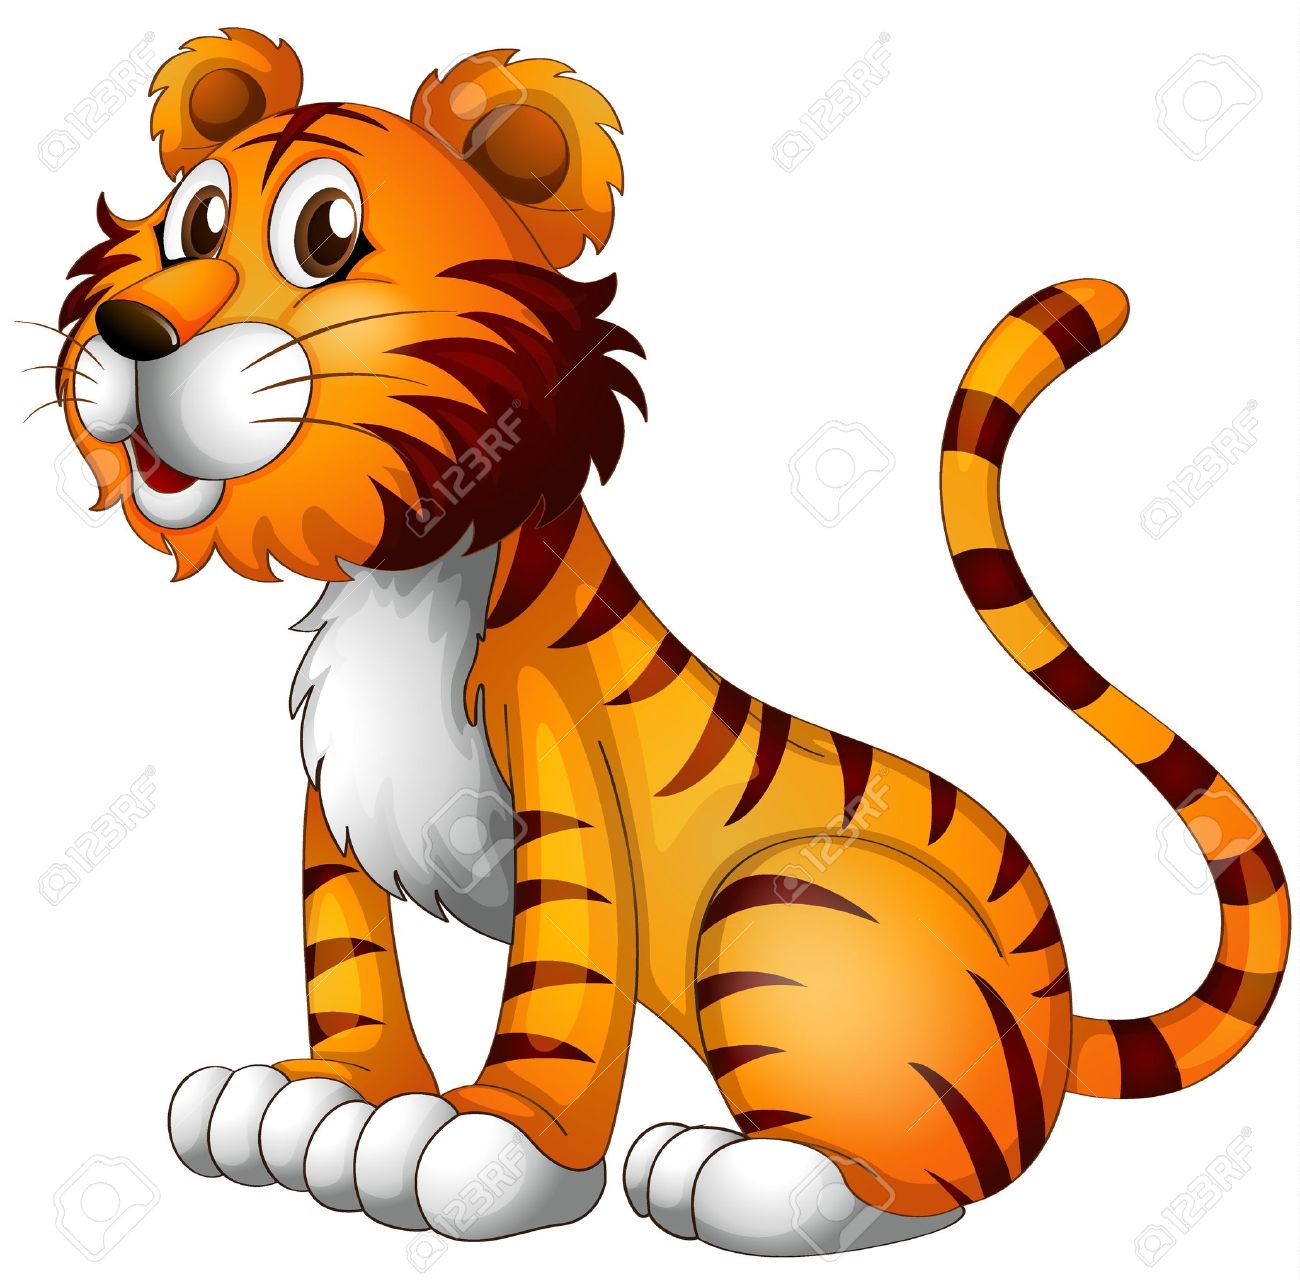 24,871 Tiger Stock Vector Illustration And Royalty Free Tiger Clipart.